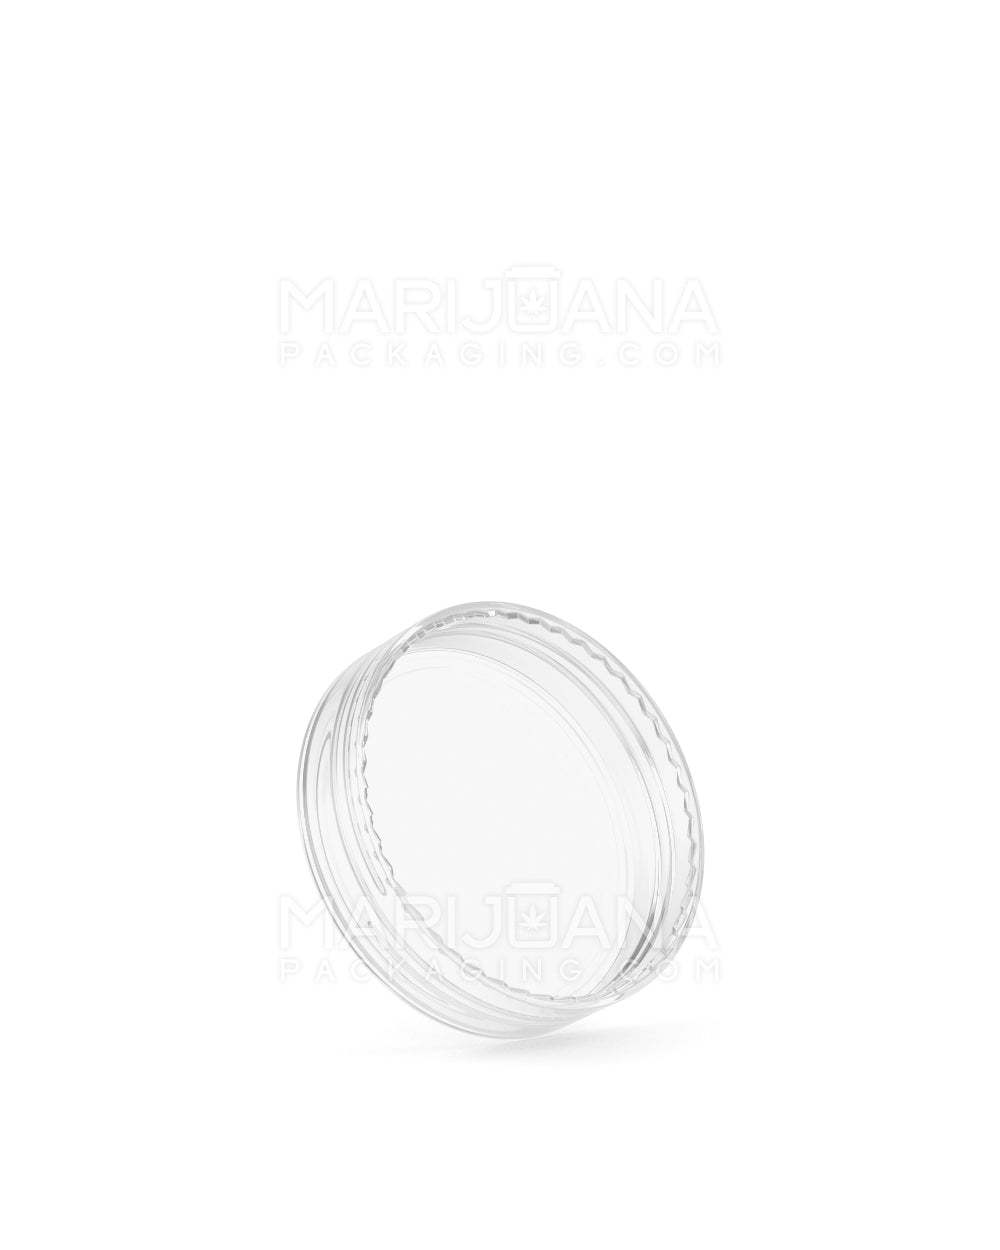 Clear Concentrate Containers w/ Screw Top Cap & White Silicone Insert | 10mL - Plastic | Sample - 11